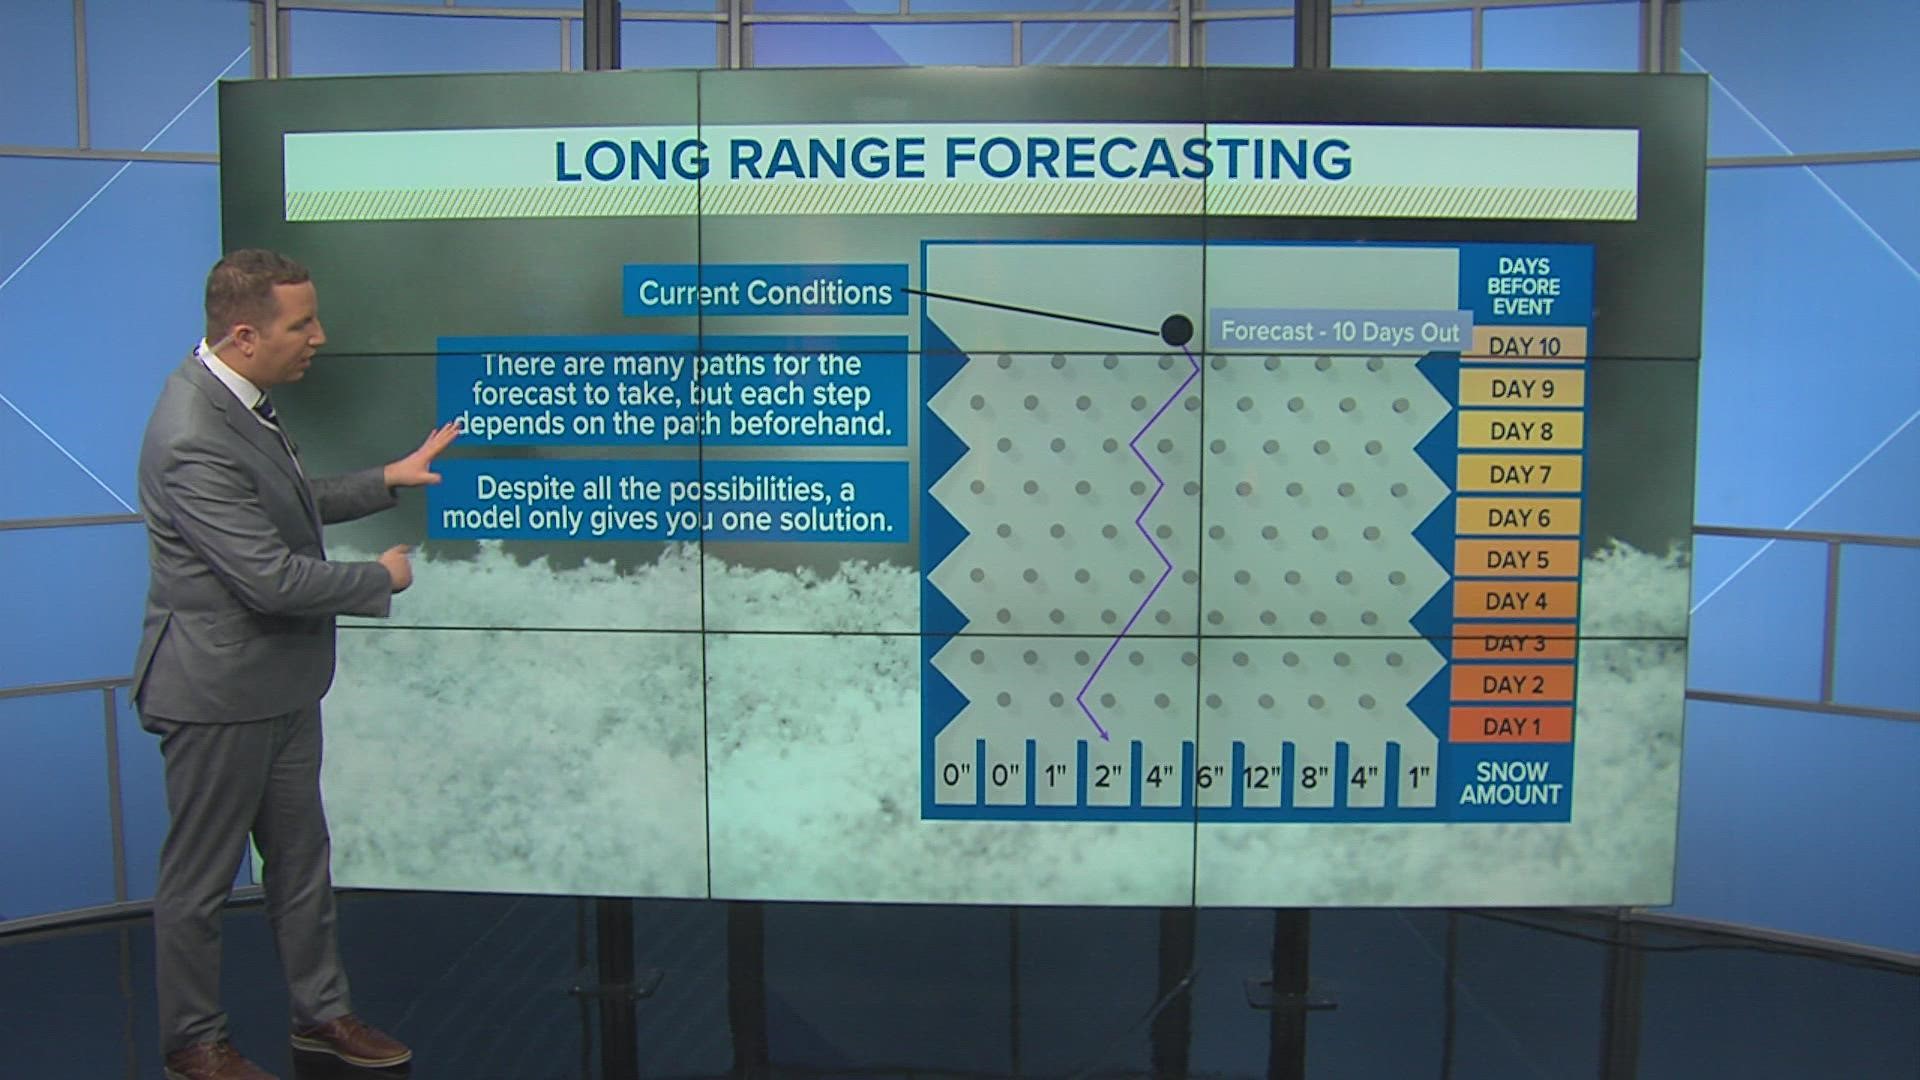 Long-range forecasting is challenging. As an event or system is farther away, it is more difficult to nail down specifics in the pattern.